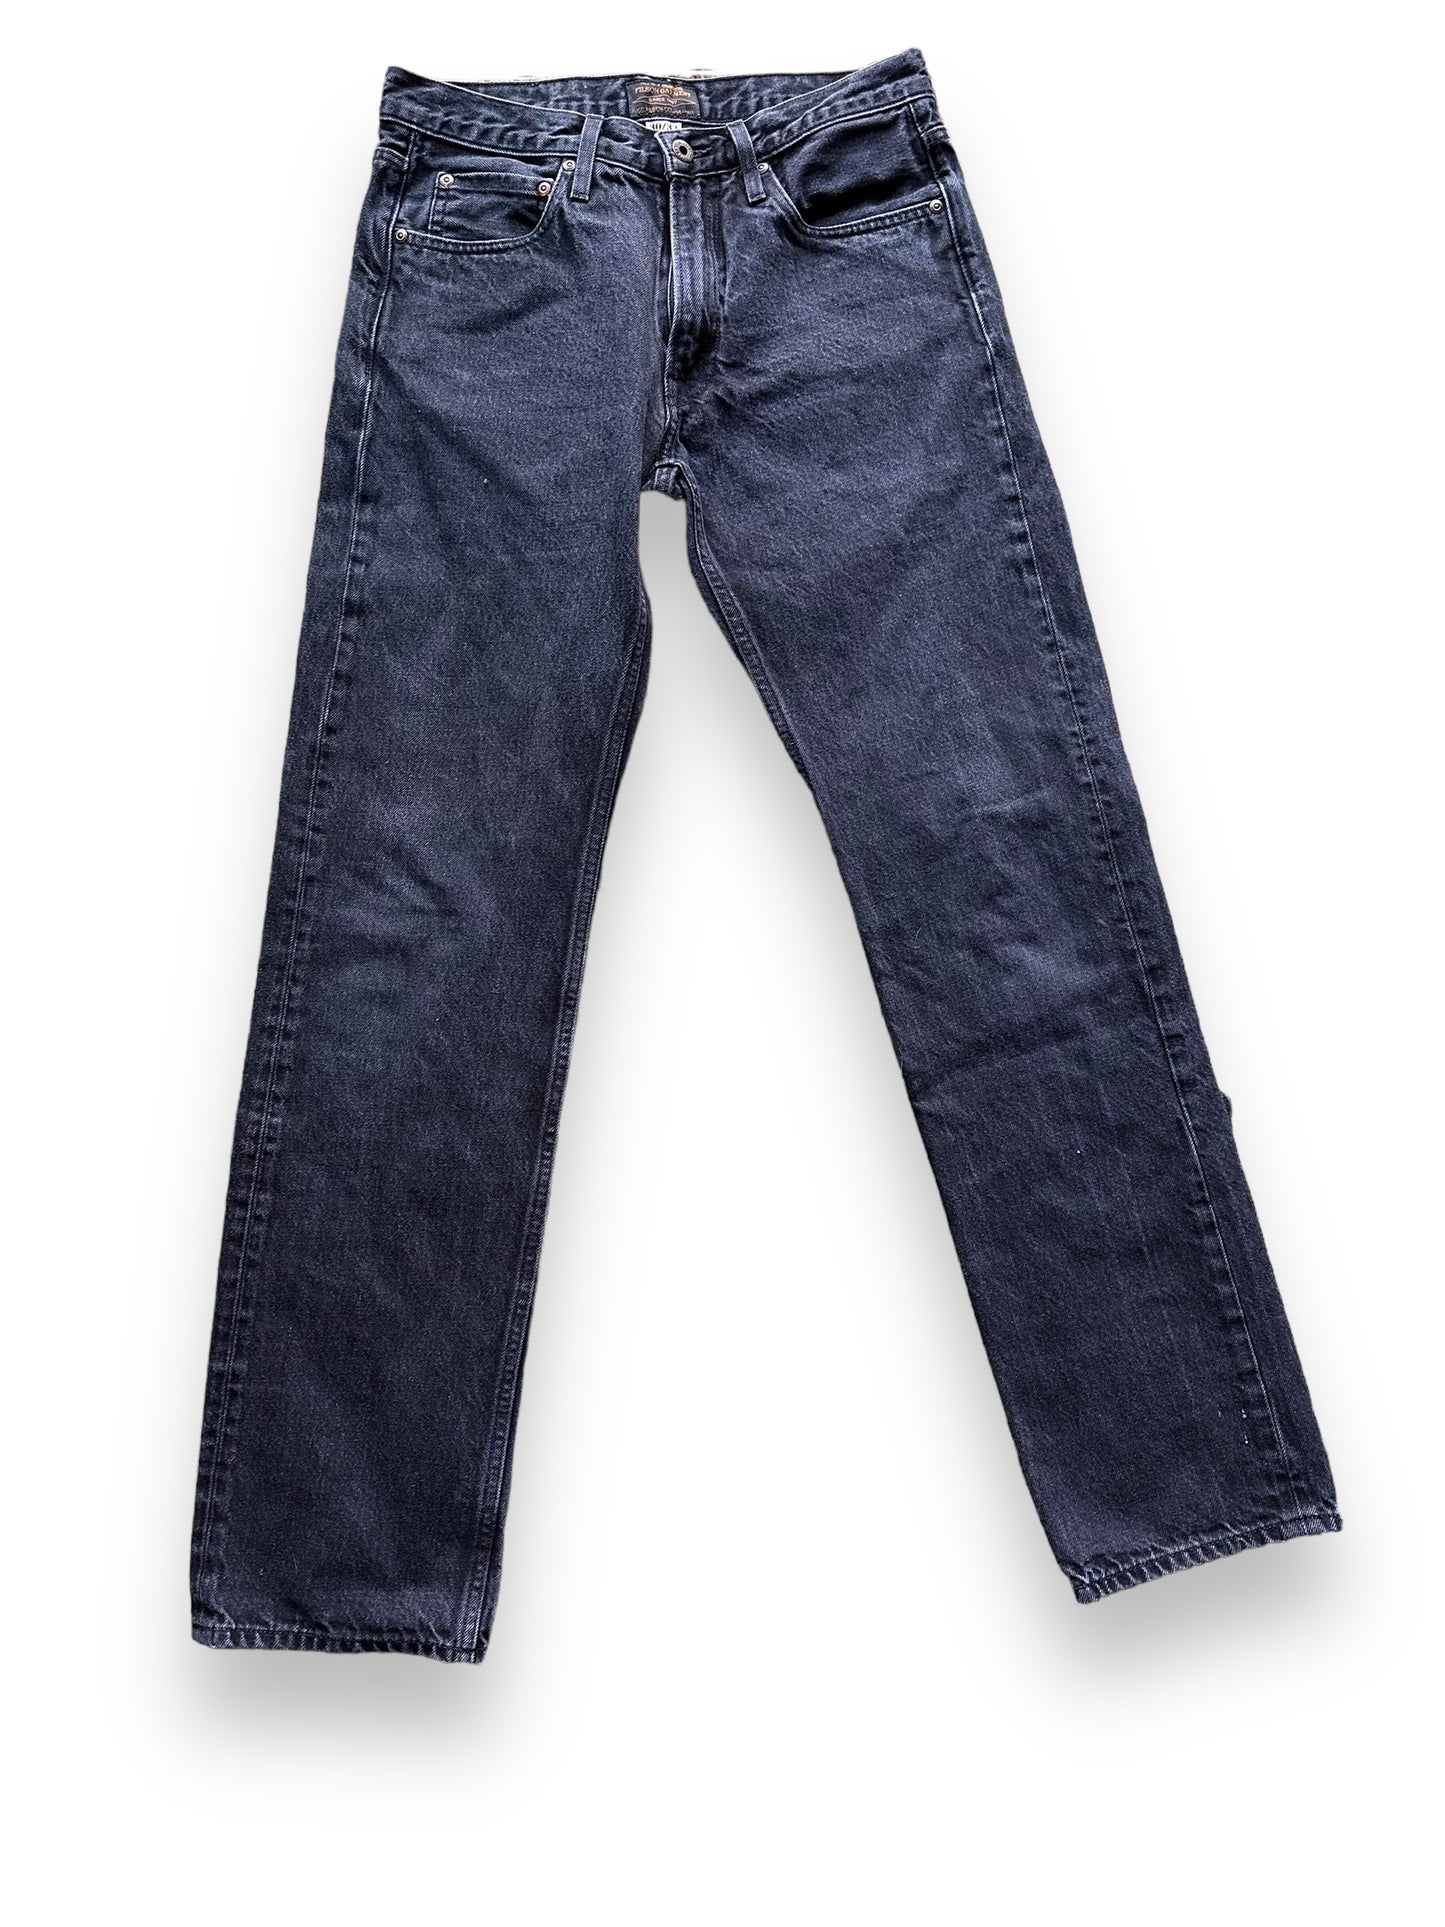 Front View of Black Filson Jeans W31 |  Filson Dungarees | Filson Workwear Seattle